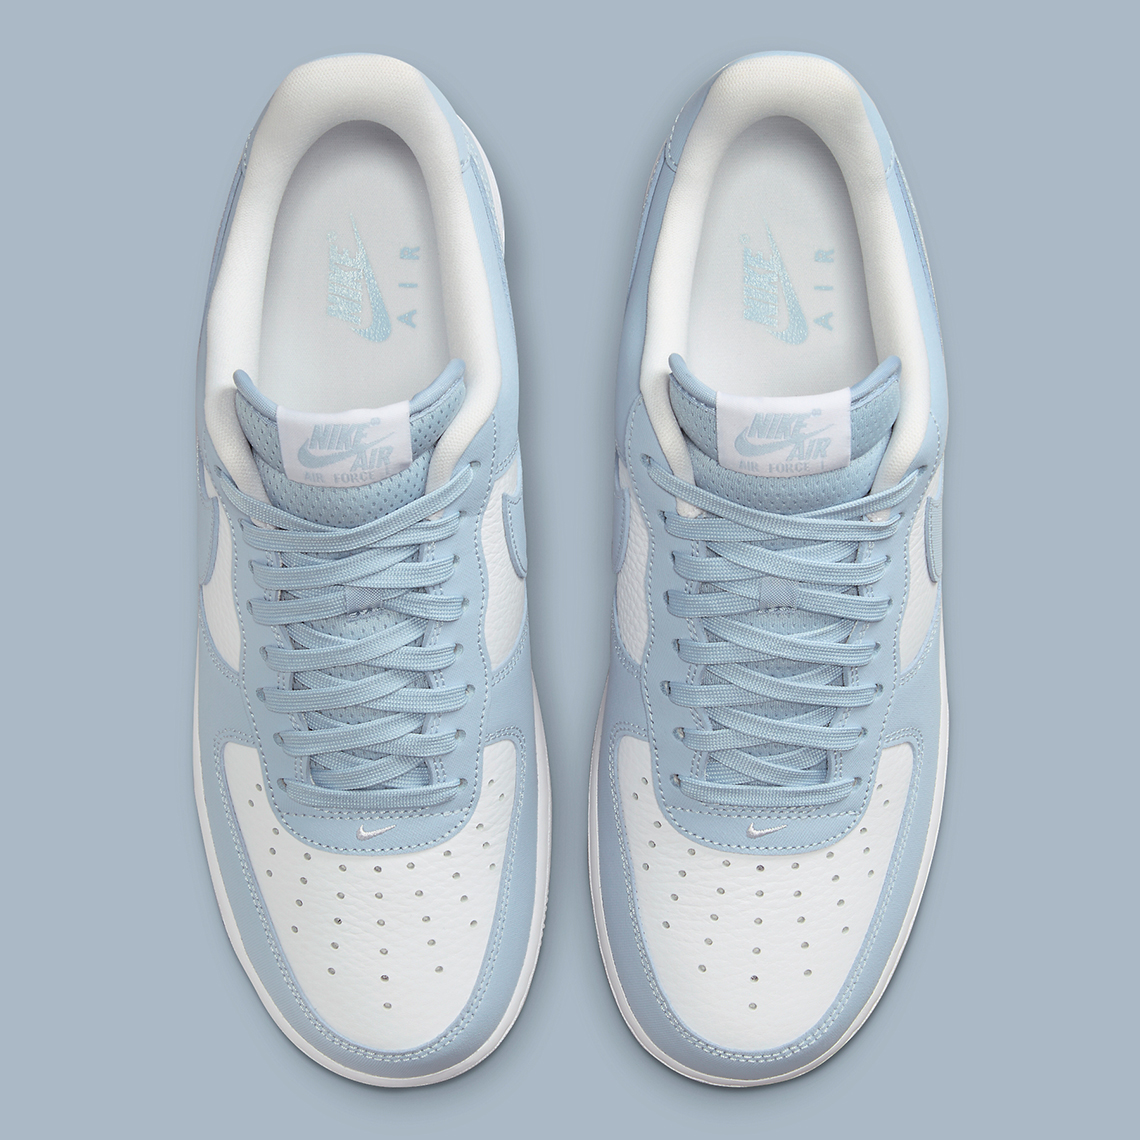 Nike Air Force 1 Low Belly Swoosh Blue White FZ4627-400 | SneakerNews.com